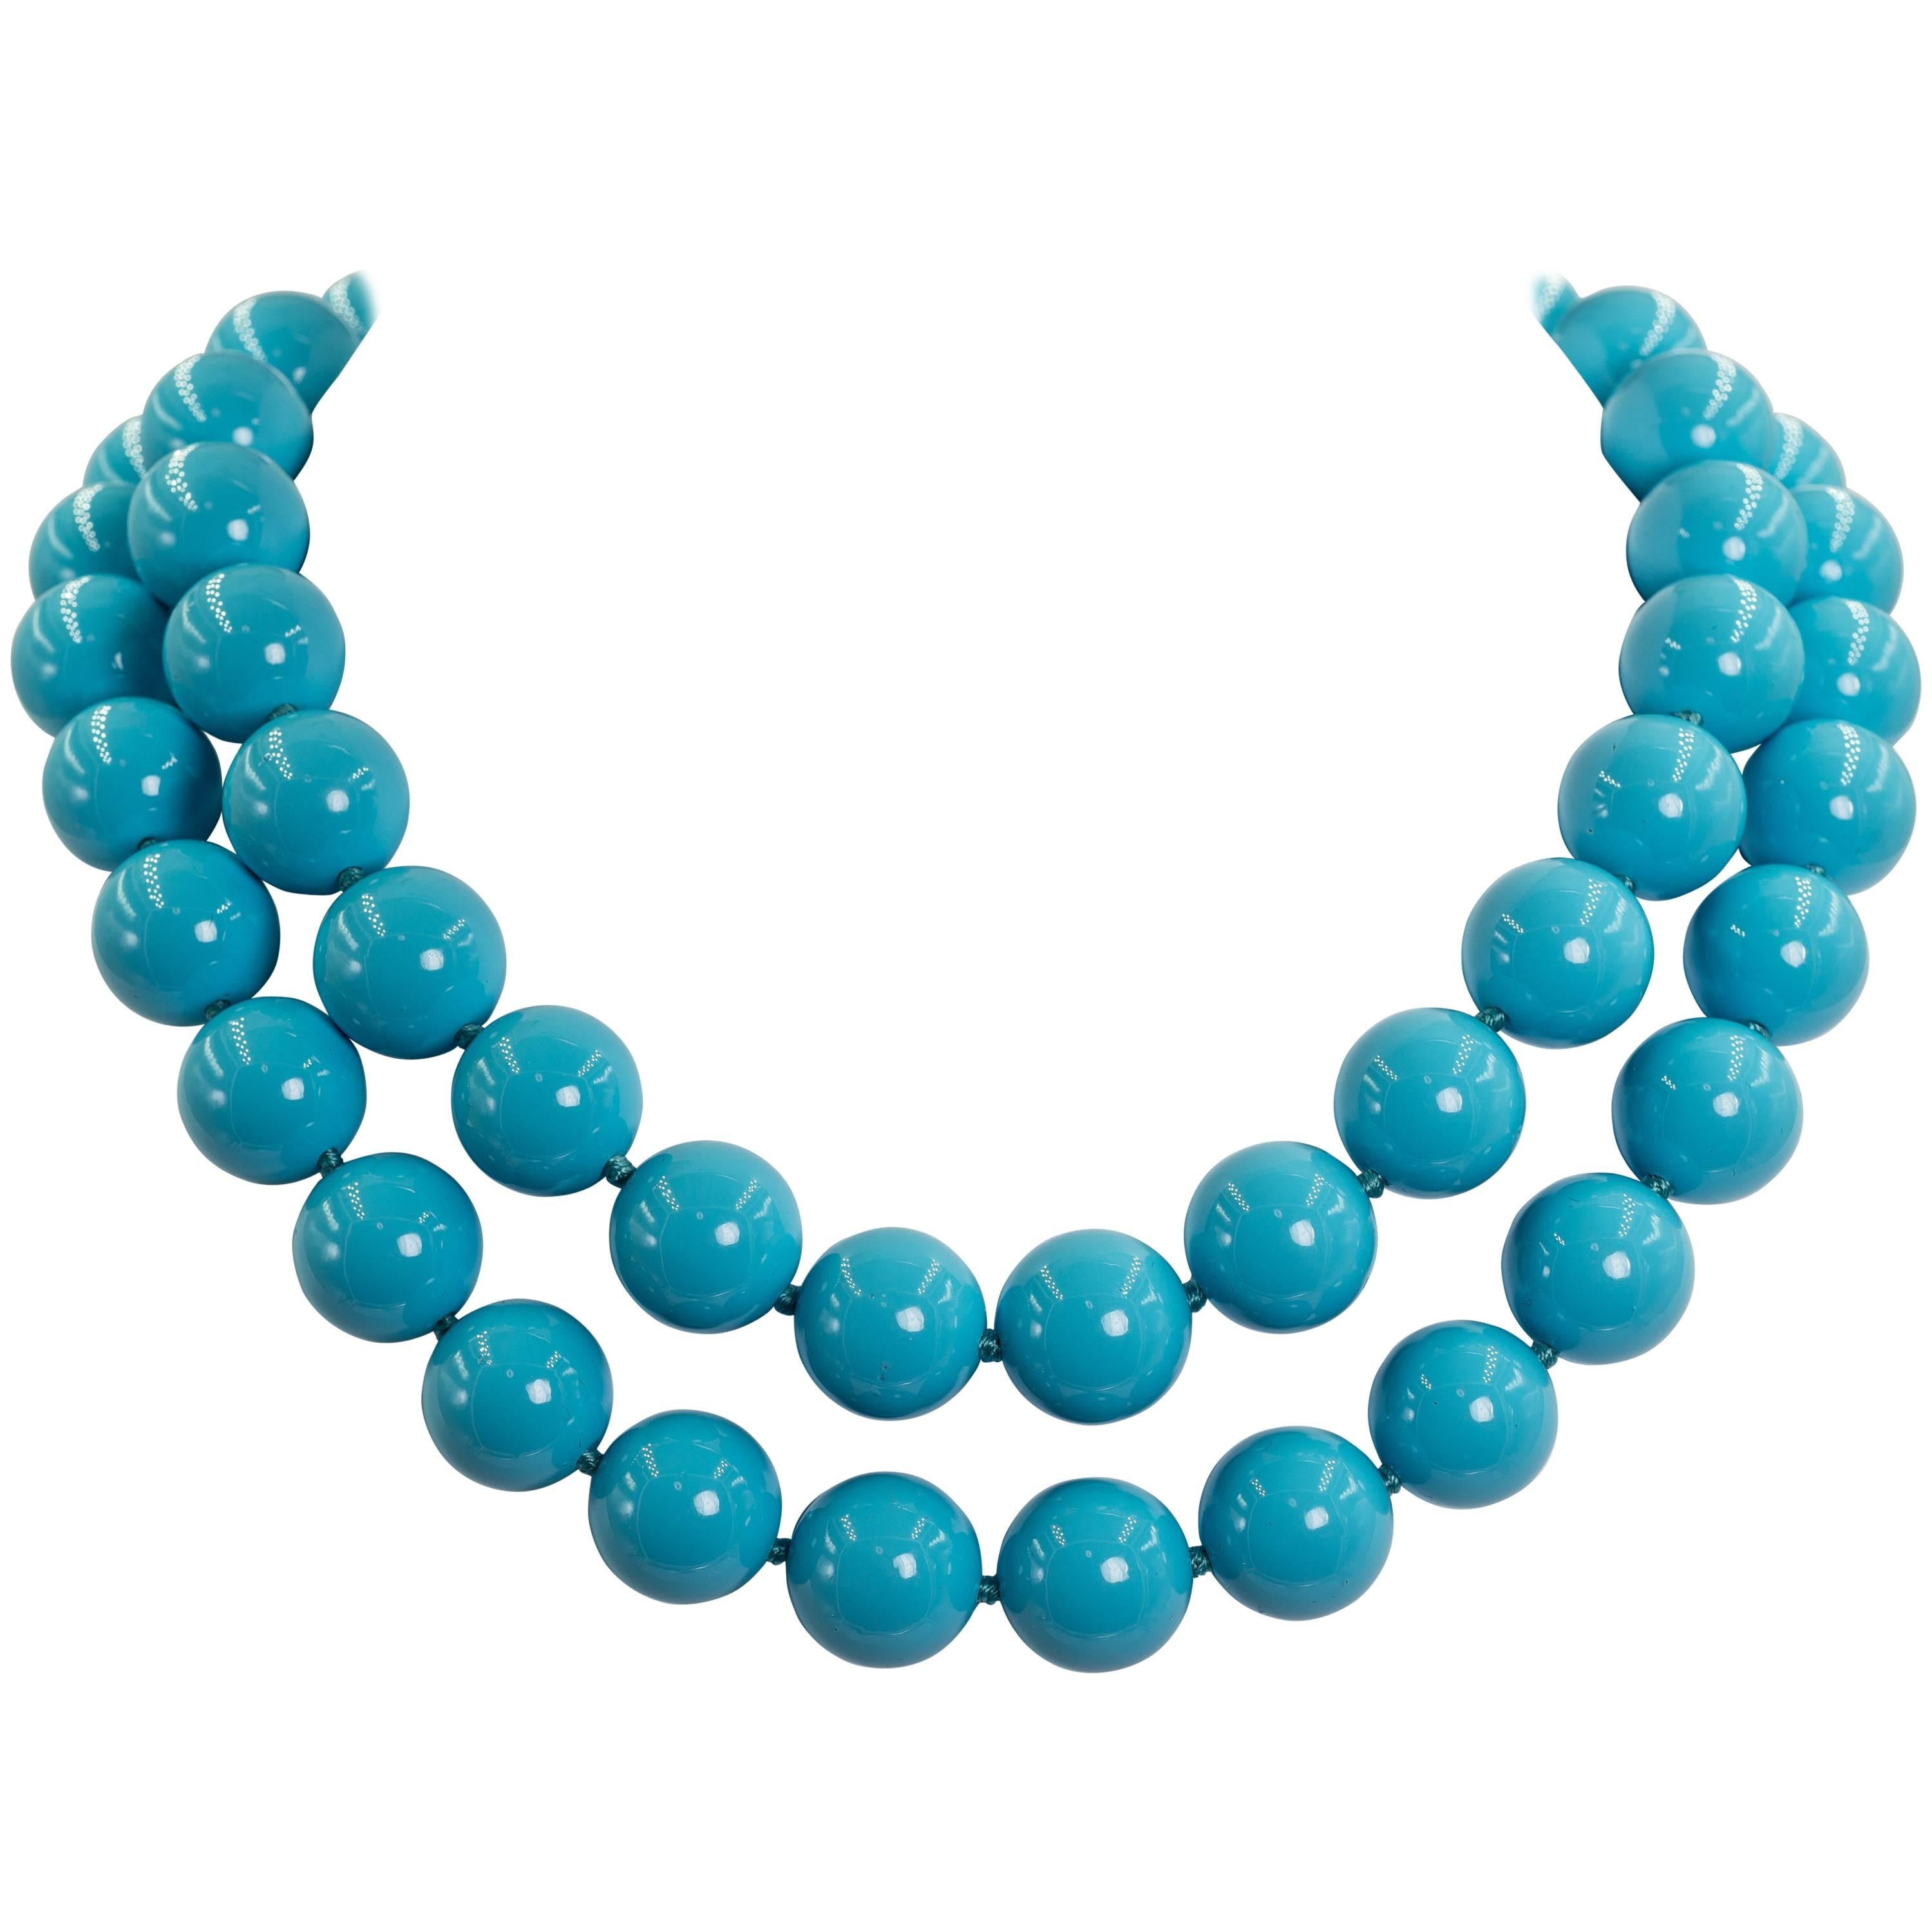 Fabulous Faux Two Strand Sleeping Beauty Shade Turquoise Bead Necklace